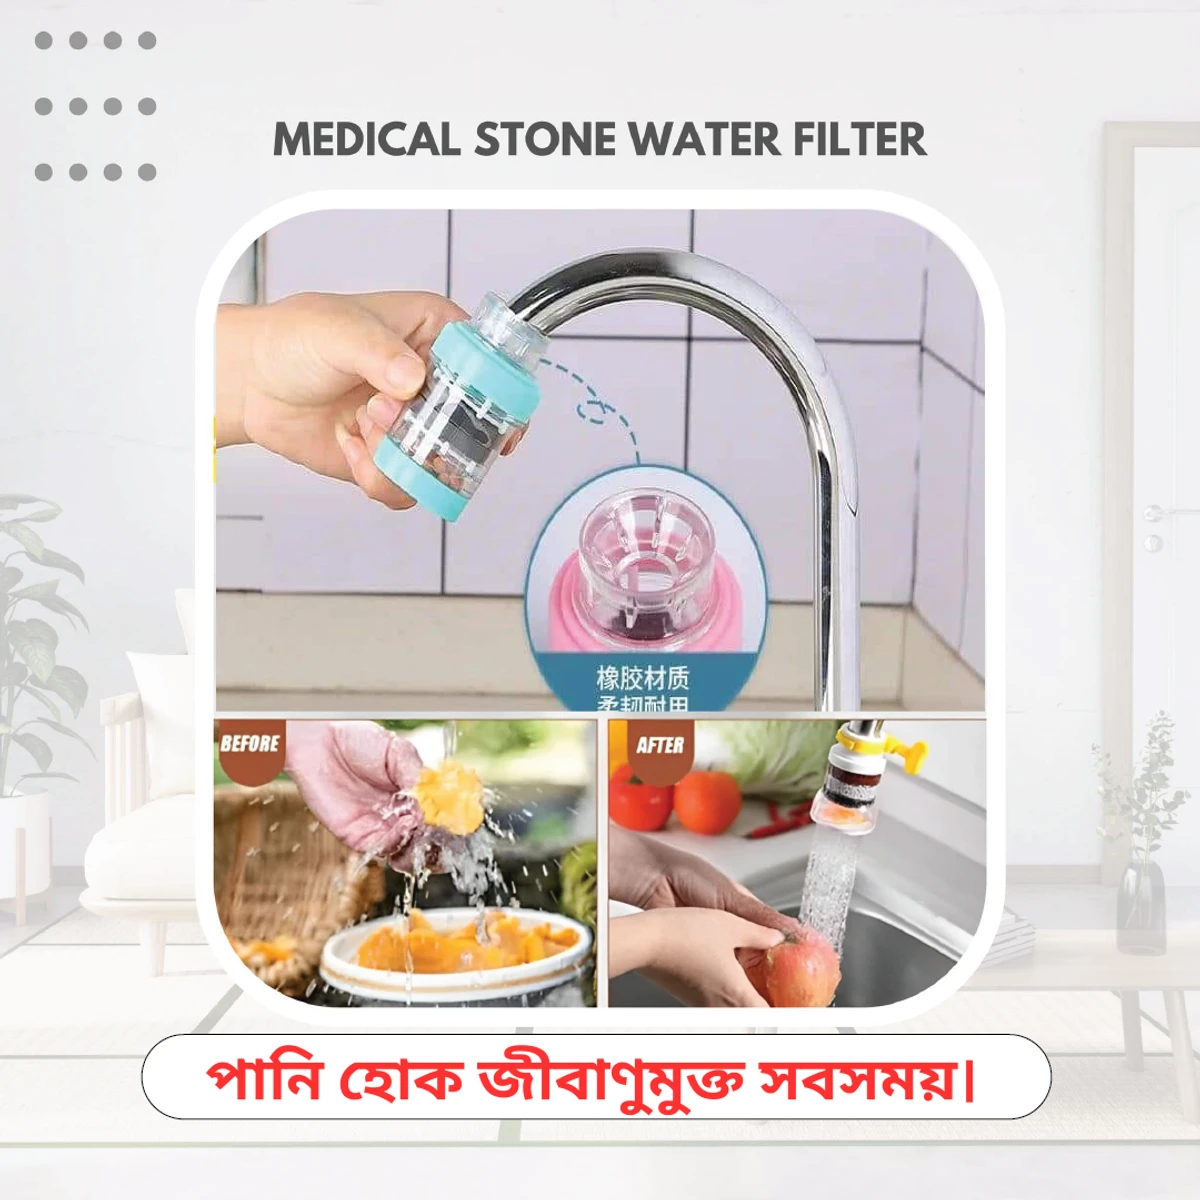 Medical stone water filter